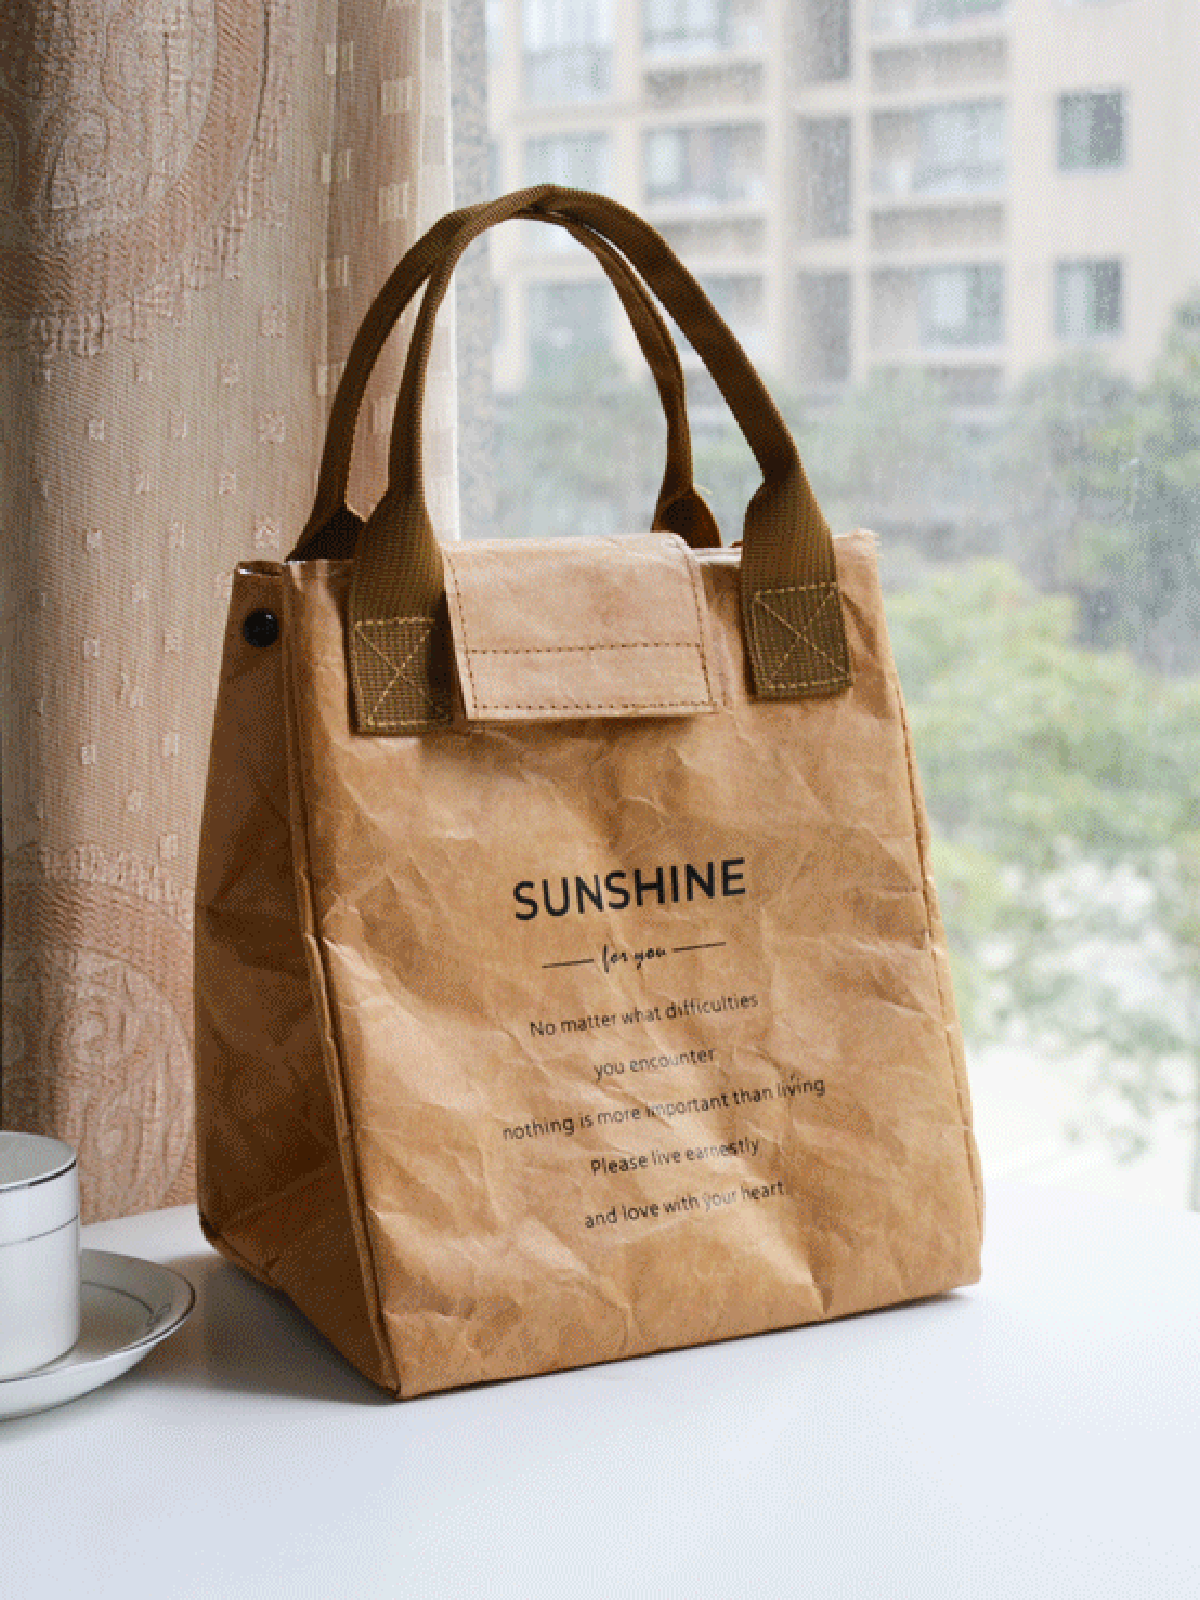 Insulated and Waterproof DuPont Paper Tote Bag for Picnic